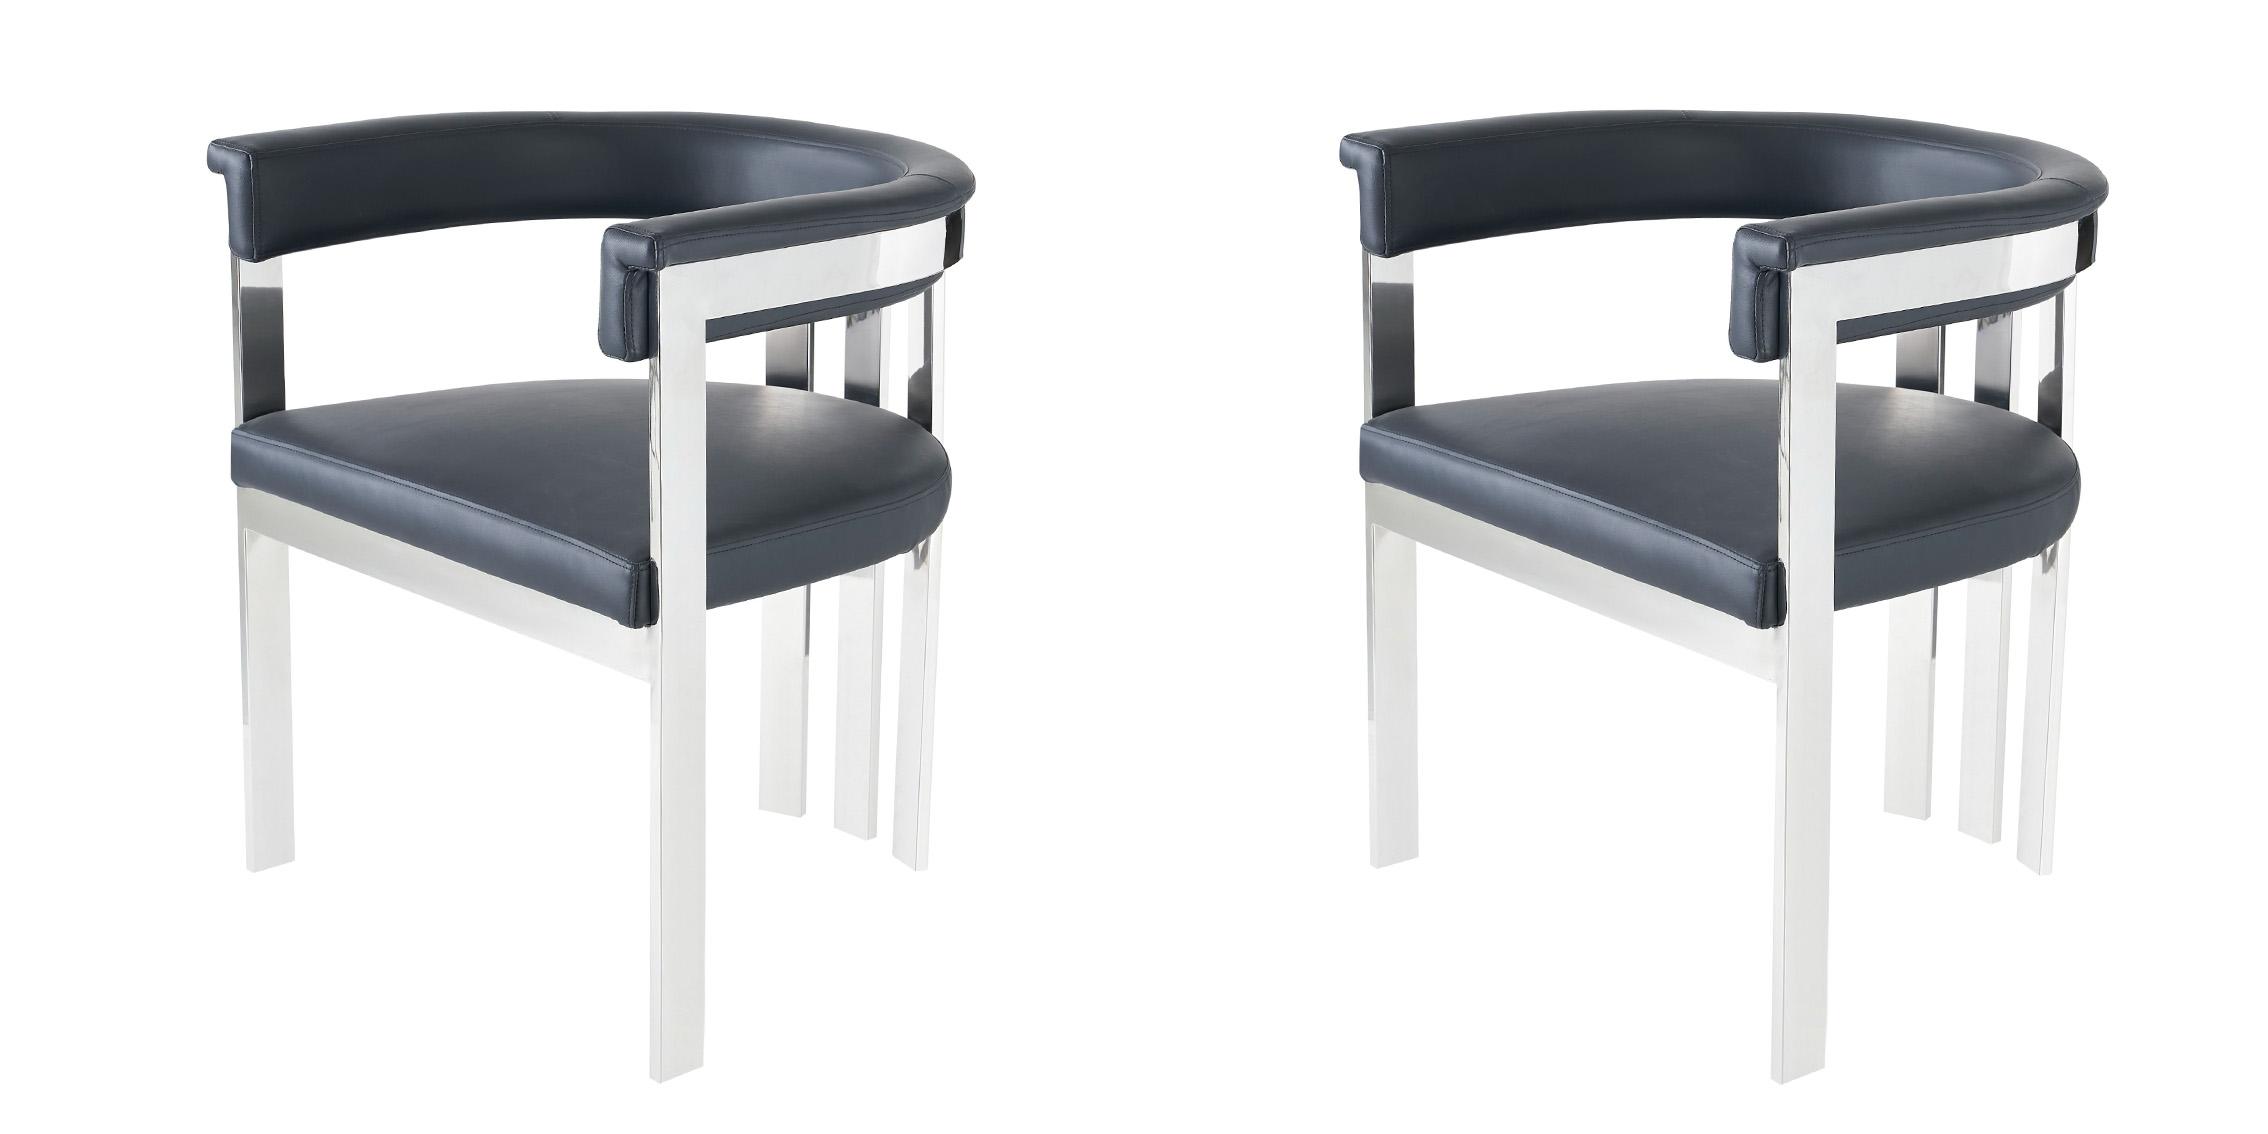 Contemporary, Modern Dining Chair Set VGZAY129-BLK-DC-Set-2 VGZAY129-BLK-DC-Set-2 in Chrome, Black Eco Leather